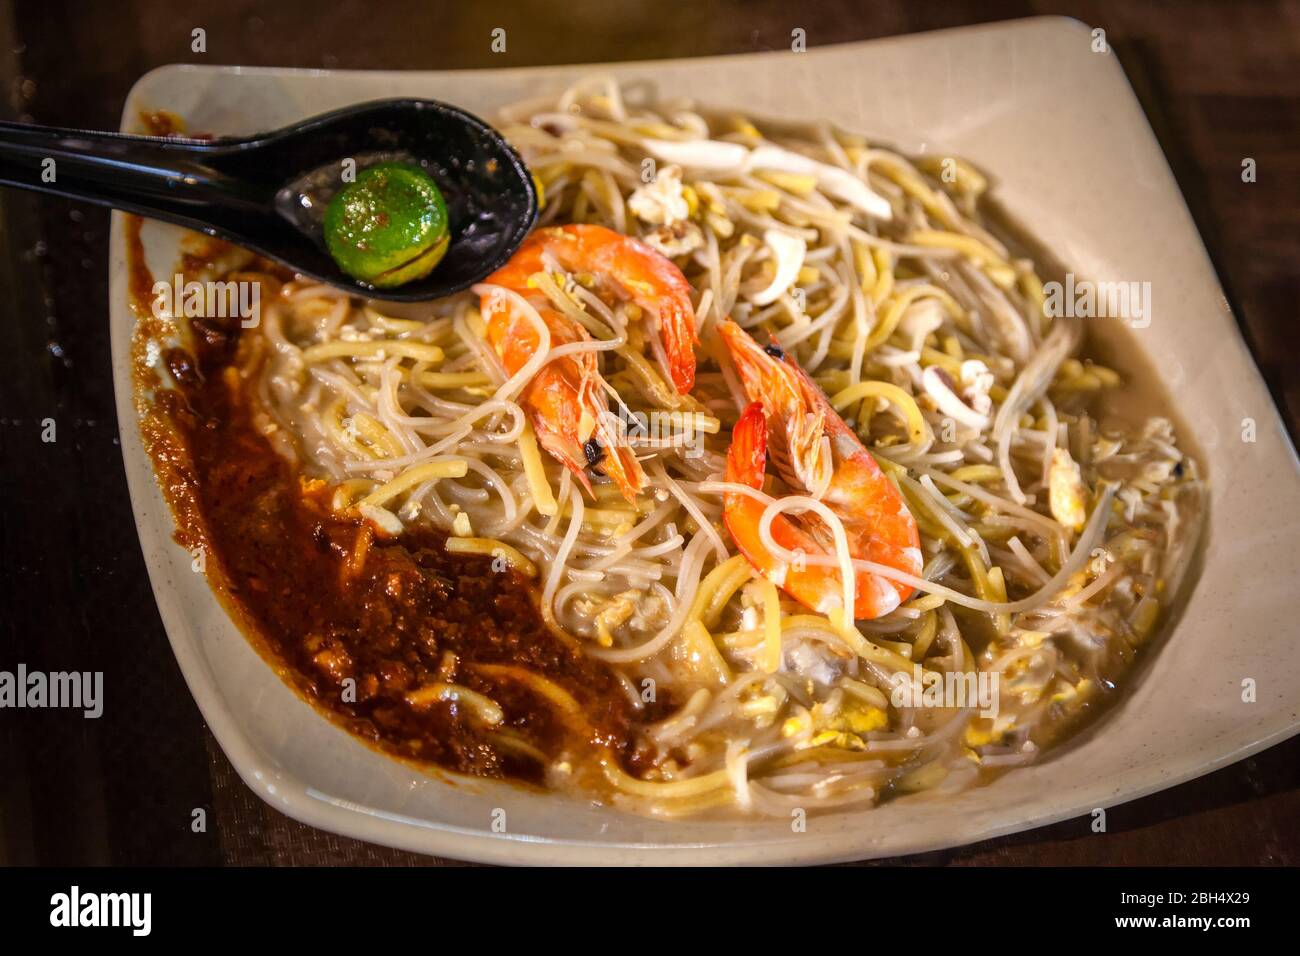 Singapore cuisine Seafood Hokkien Mee with jumbo prawns, squid, pork and eggs fried together with yellow noodles and vermicelli in seafood broth. Serv Stock Photo